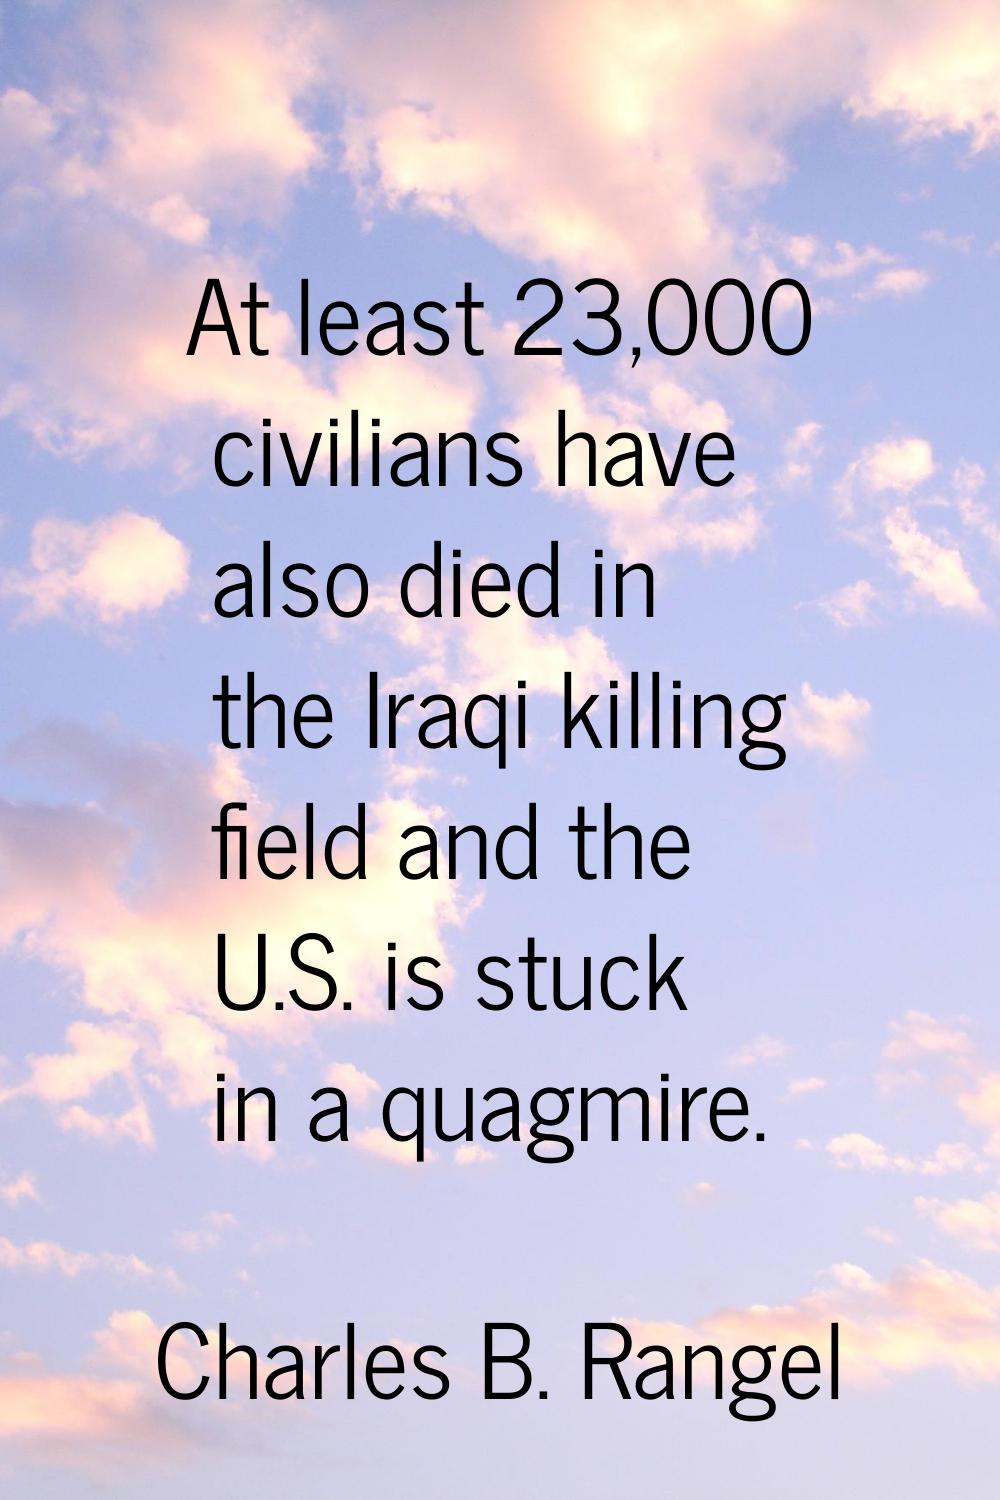 At least 23,000 civilians have also died in the Iraqi killing field and the U.S. is stuck in a quag